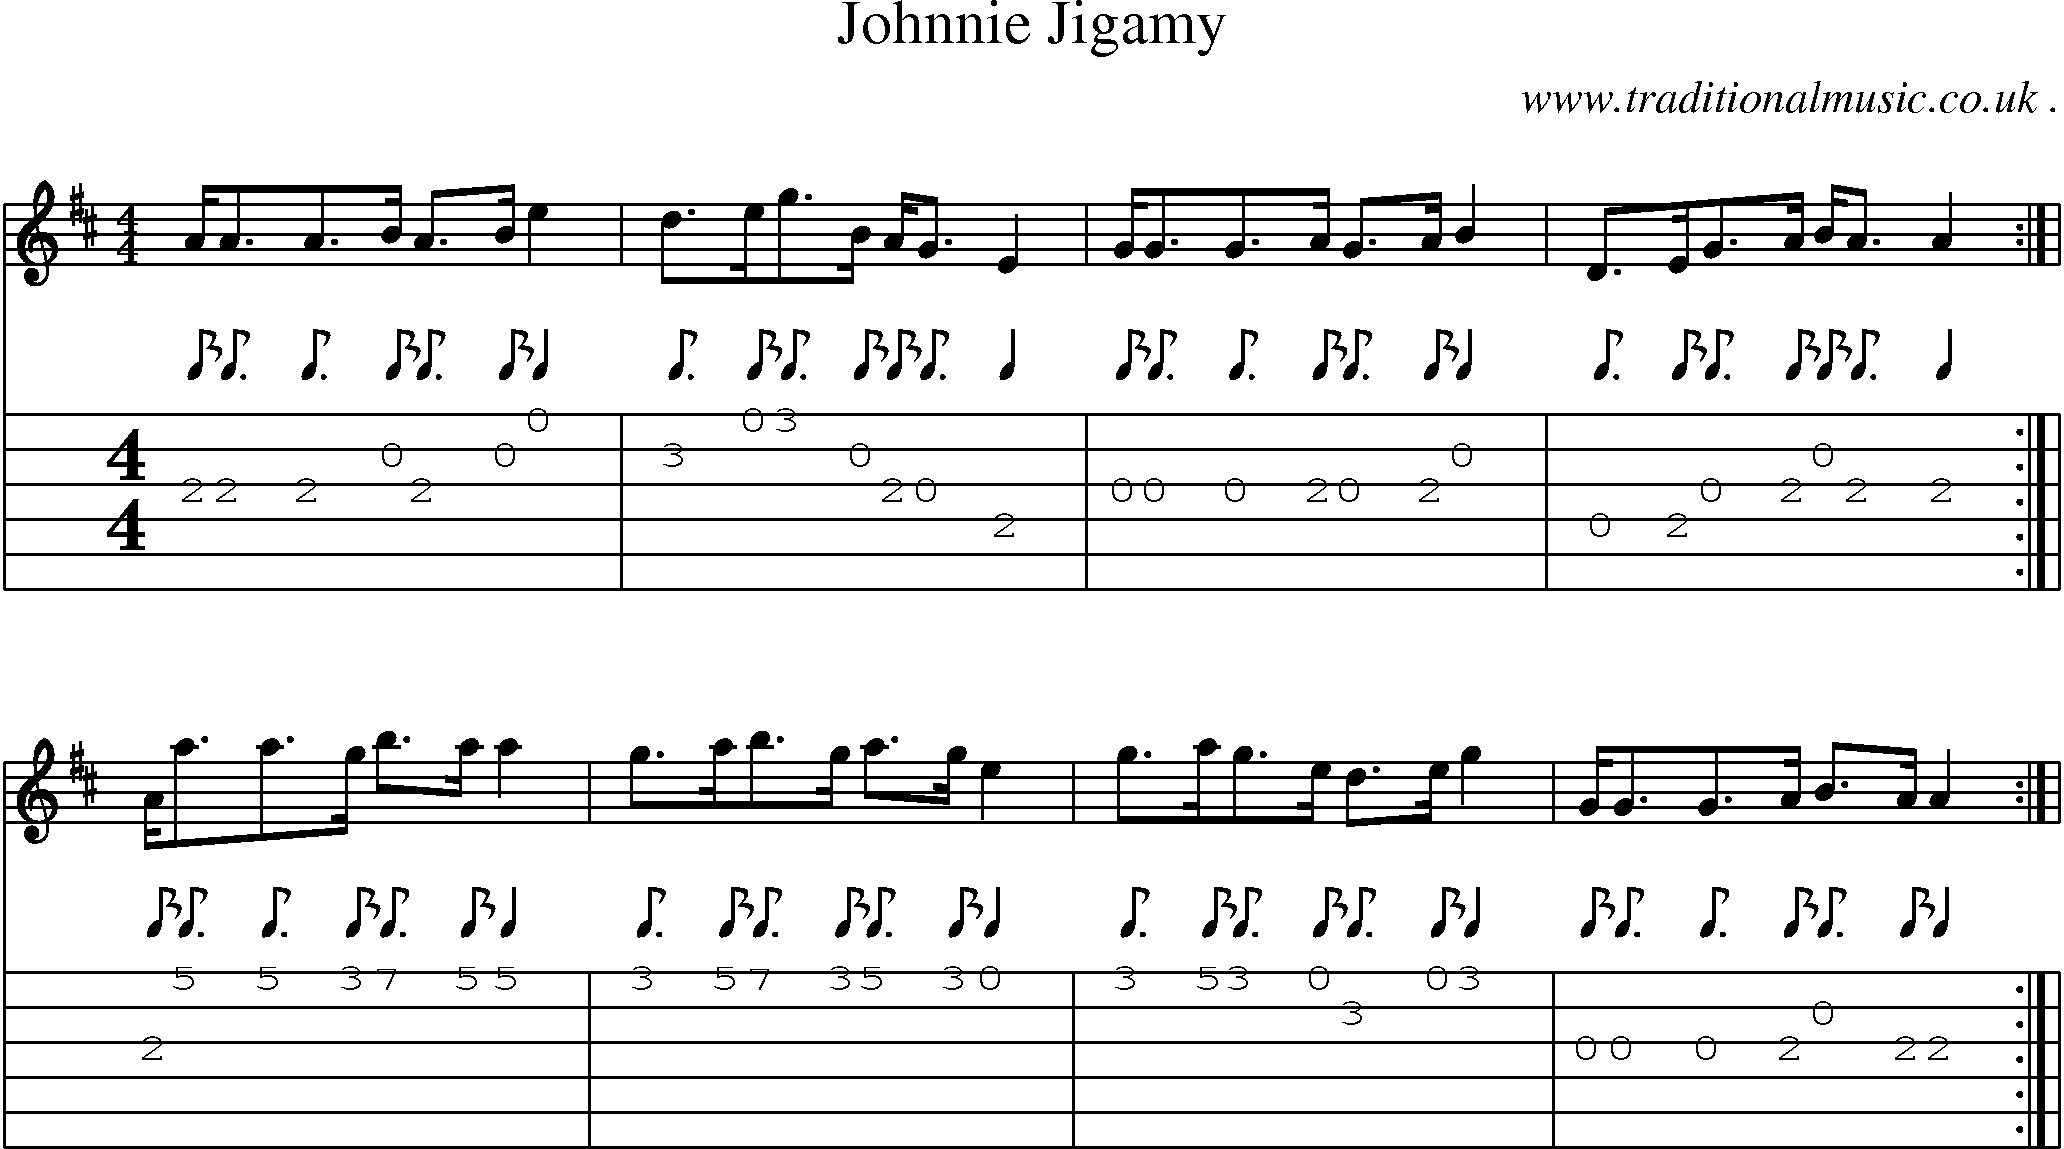 Sheet-Music and Guitar Tabs for Johnnie Jigamy